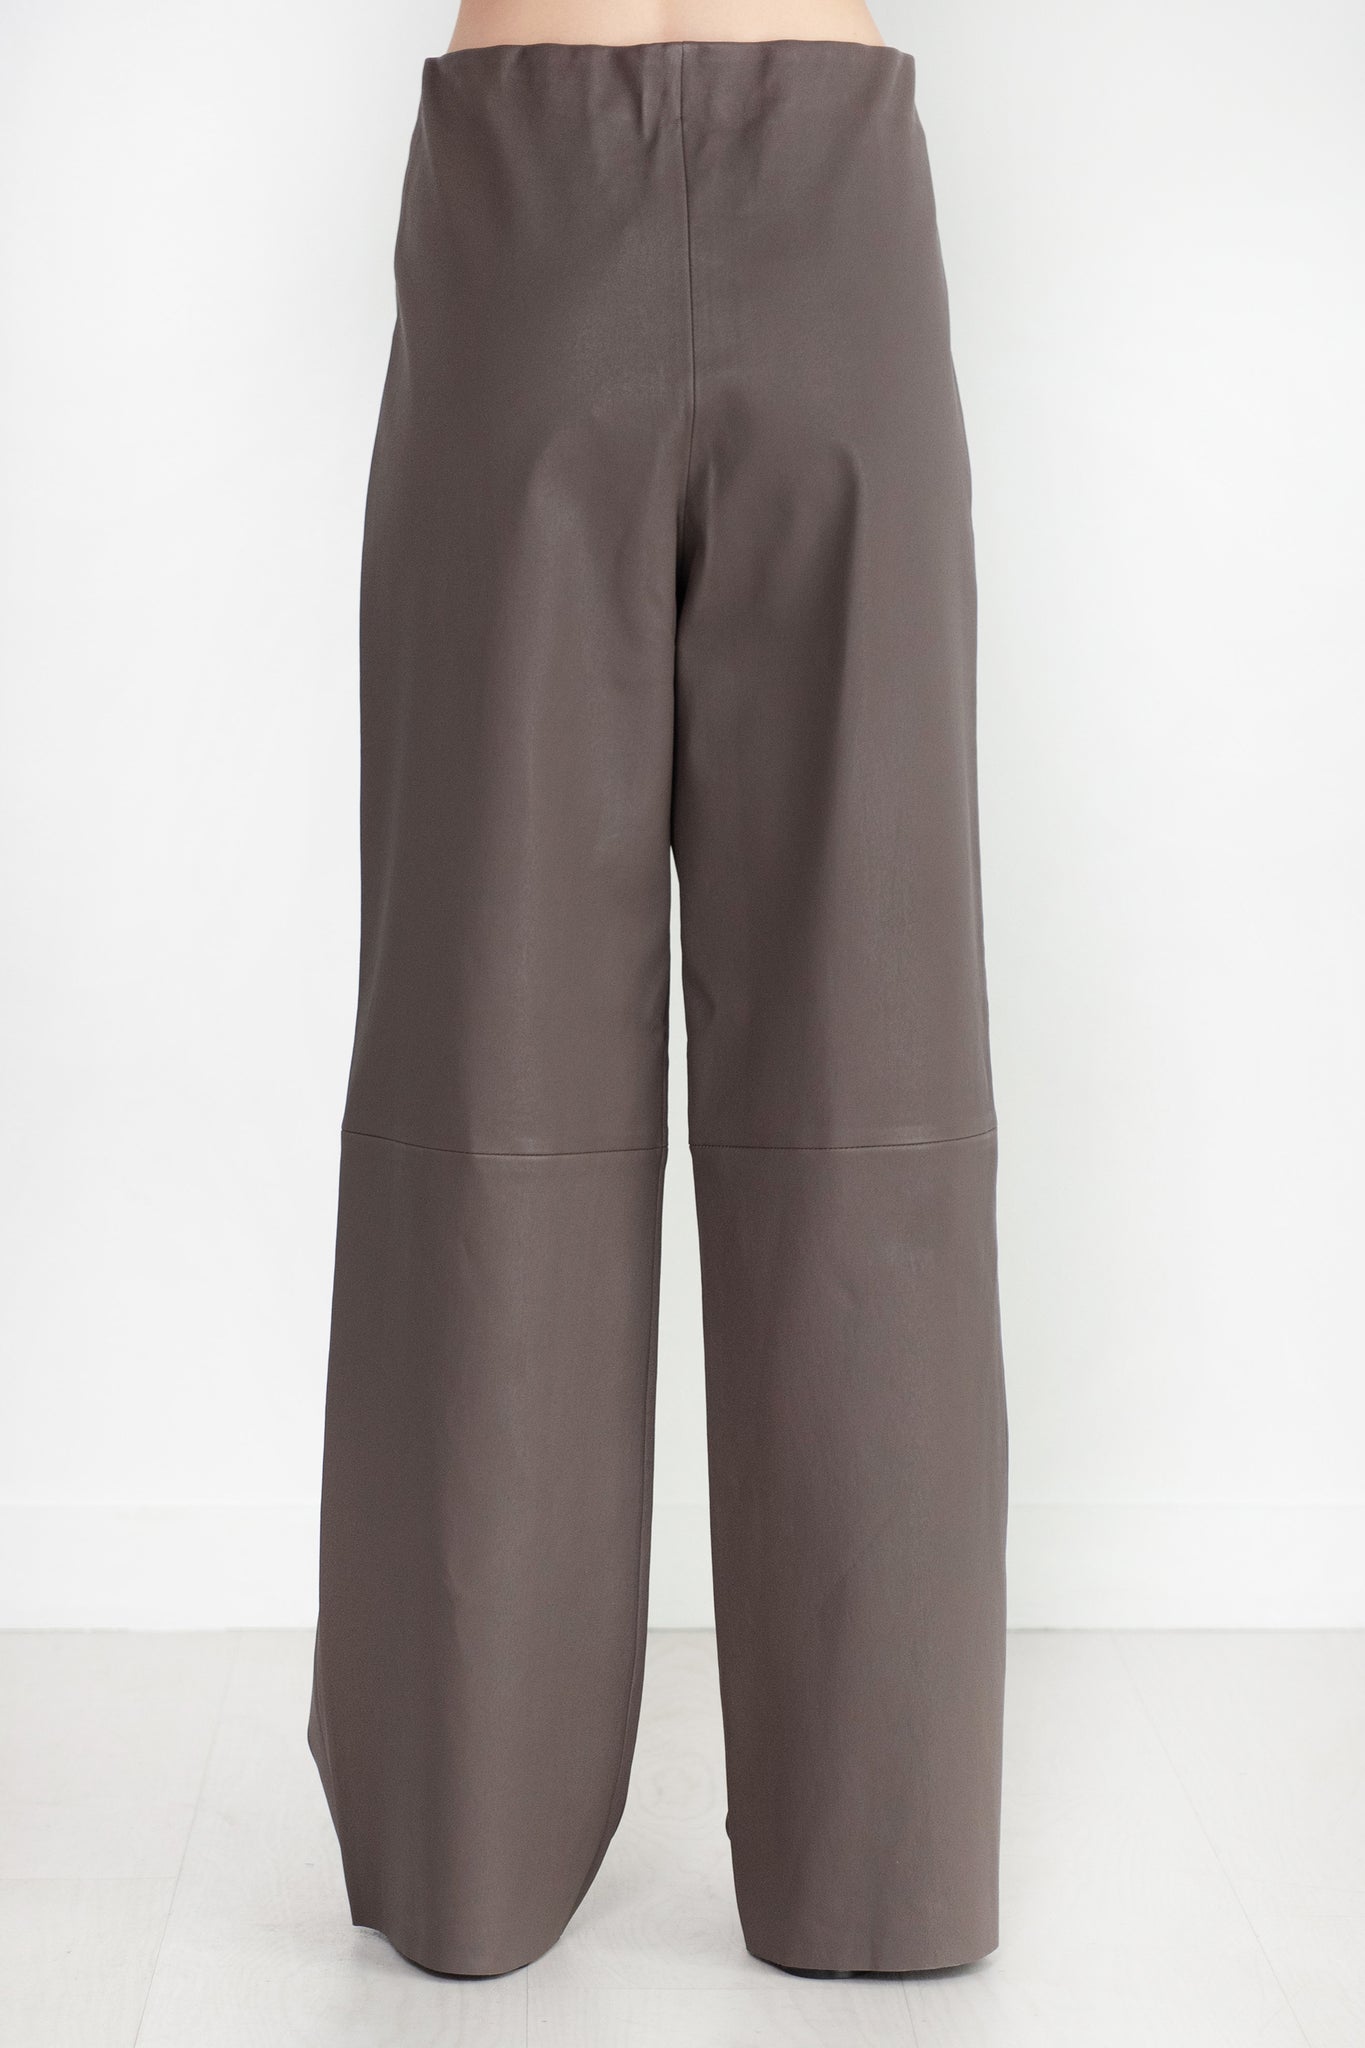 ODEEH - Nappa Stretch Leather Trousers, Olive-Brown